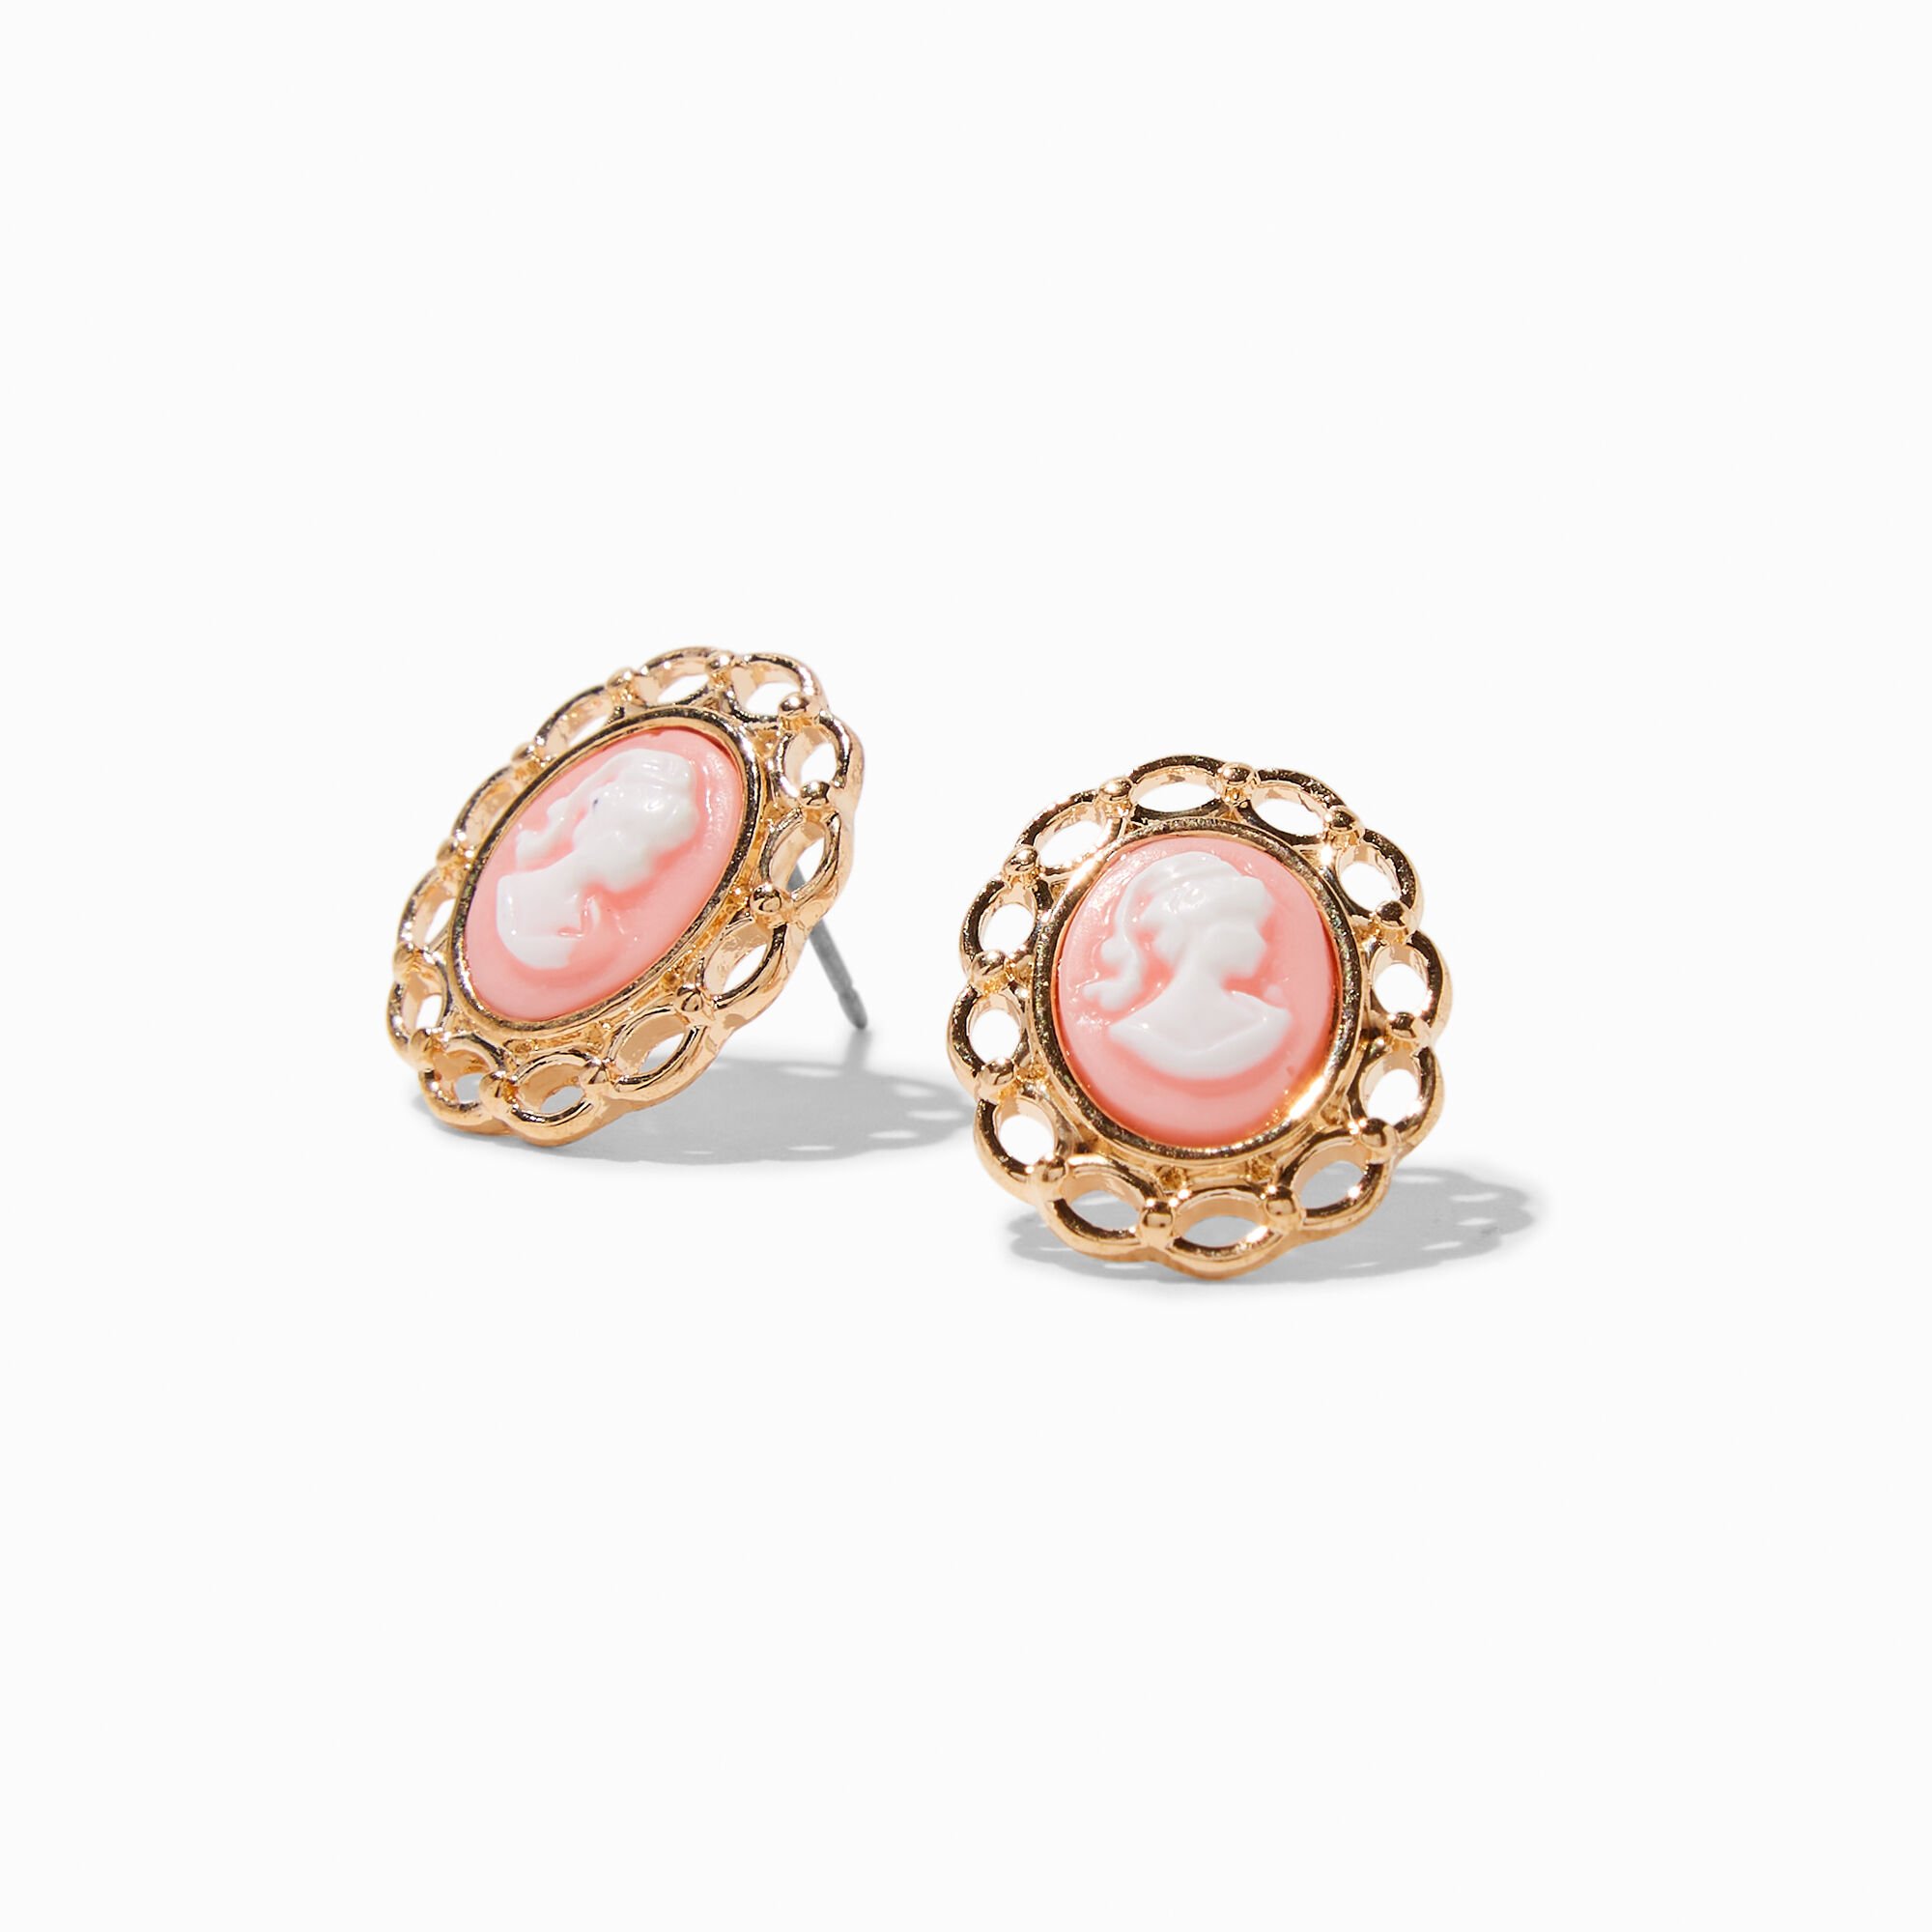 View Claires GoldTone Cameo Stud Earrings Pink information